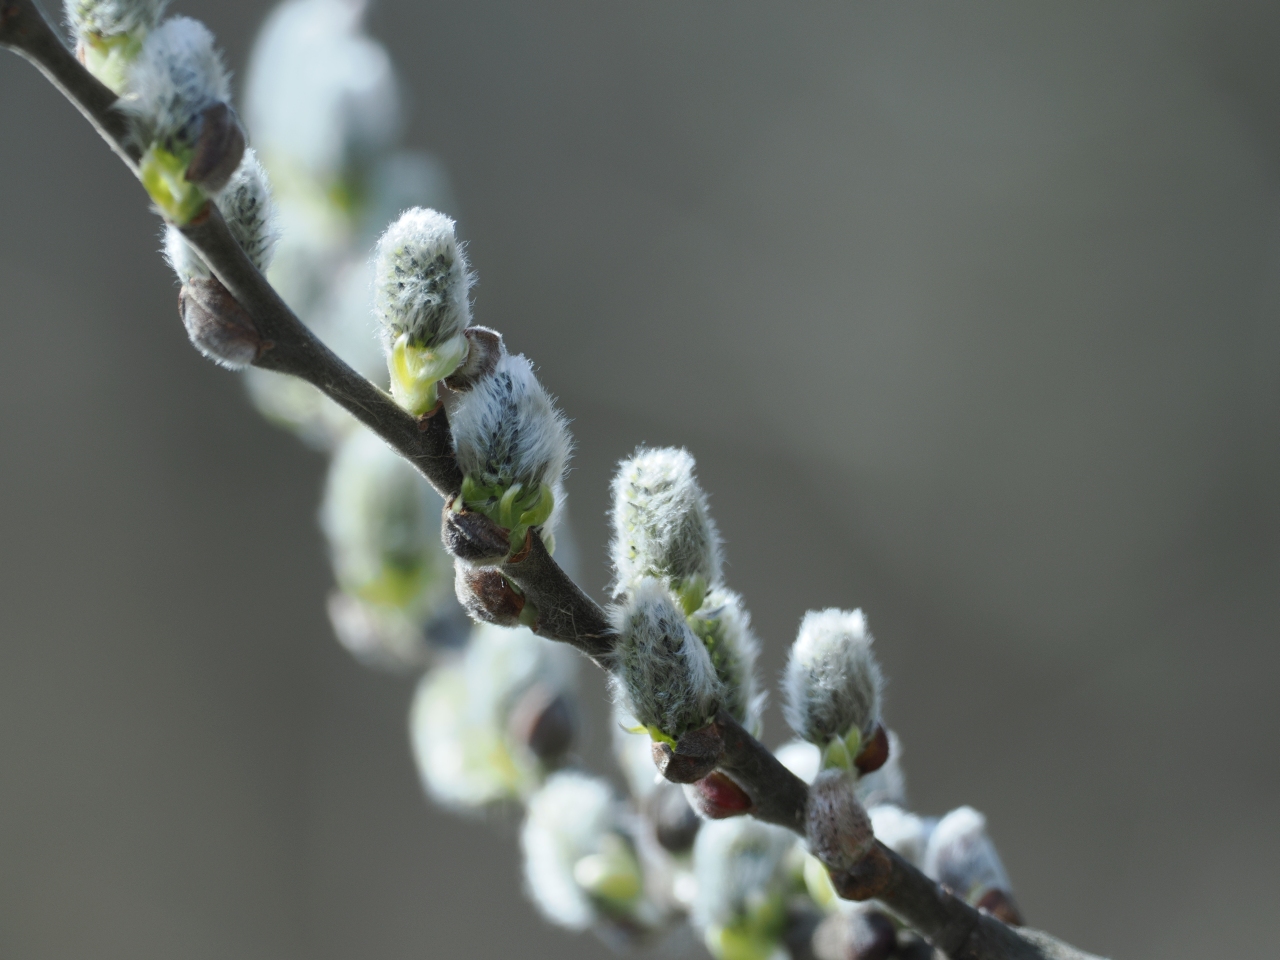 A very different take on photographing unopened buds, also from early March